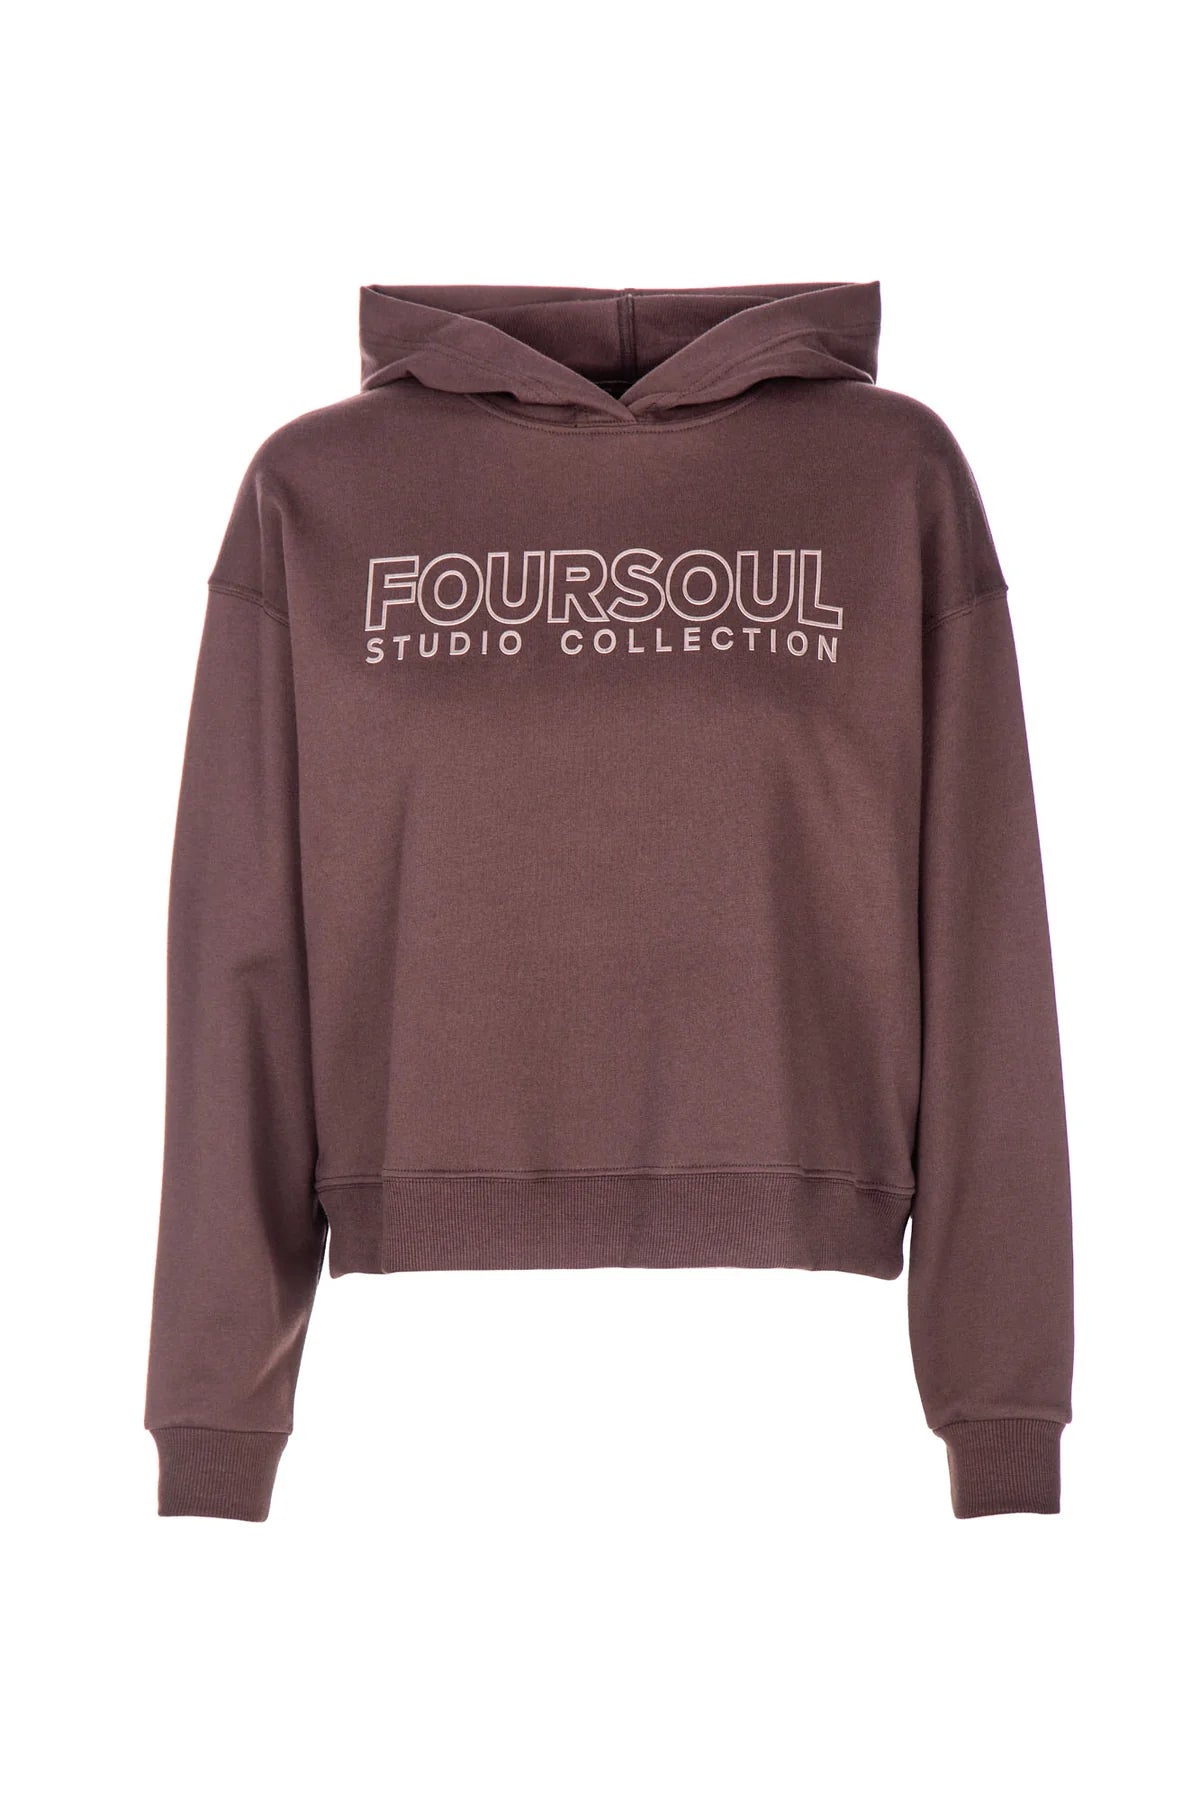 FOURSOUL HIG RELIEF HOODIE